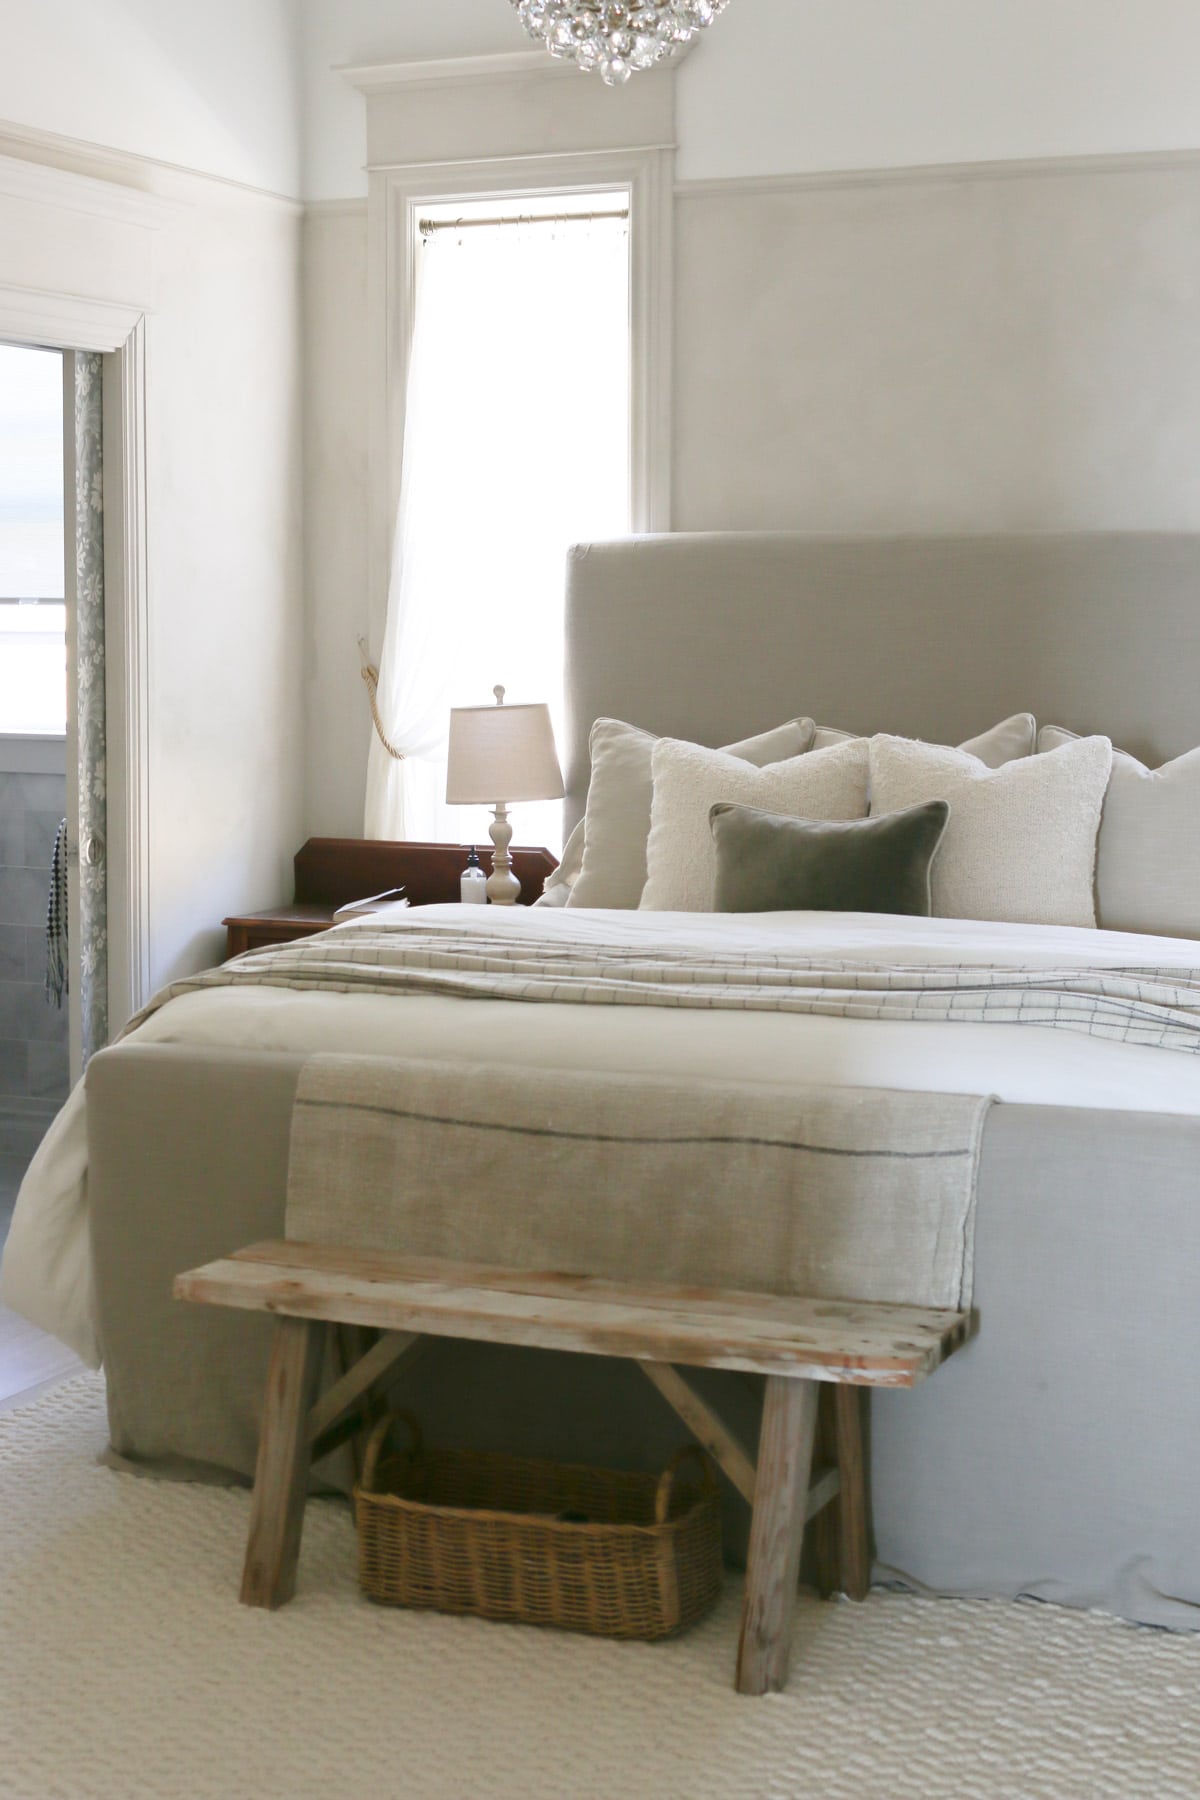 How to layer and style a bed like a pro